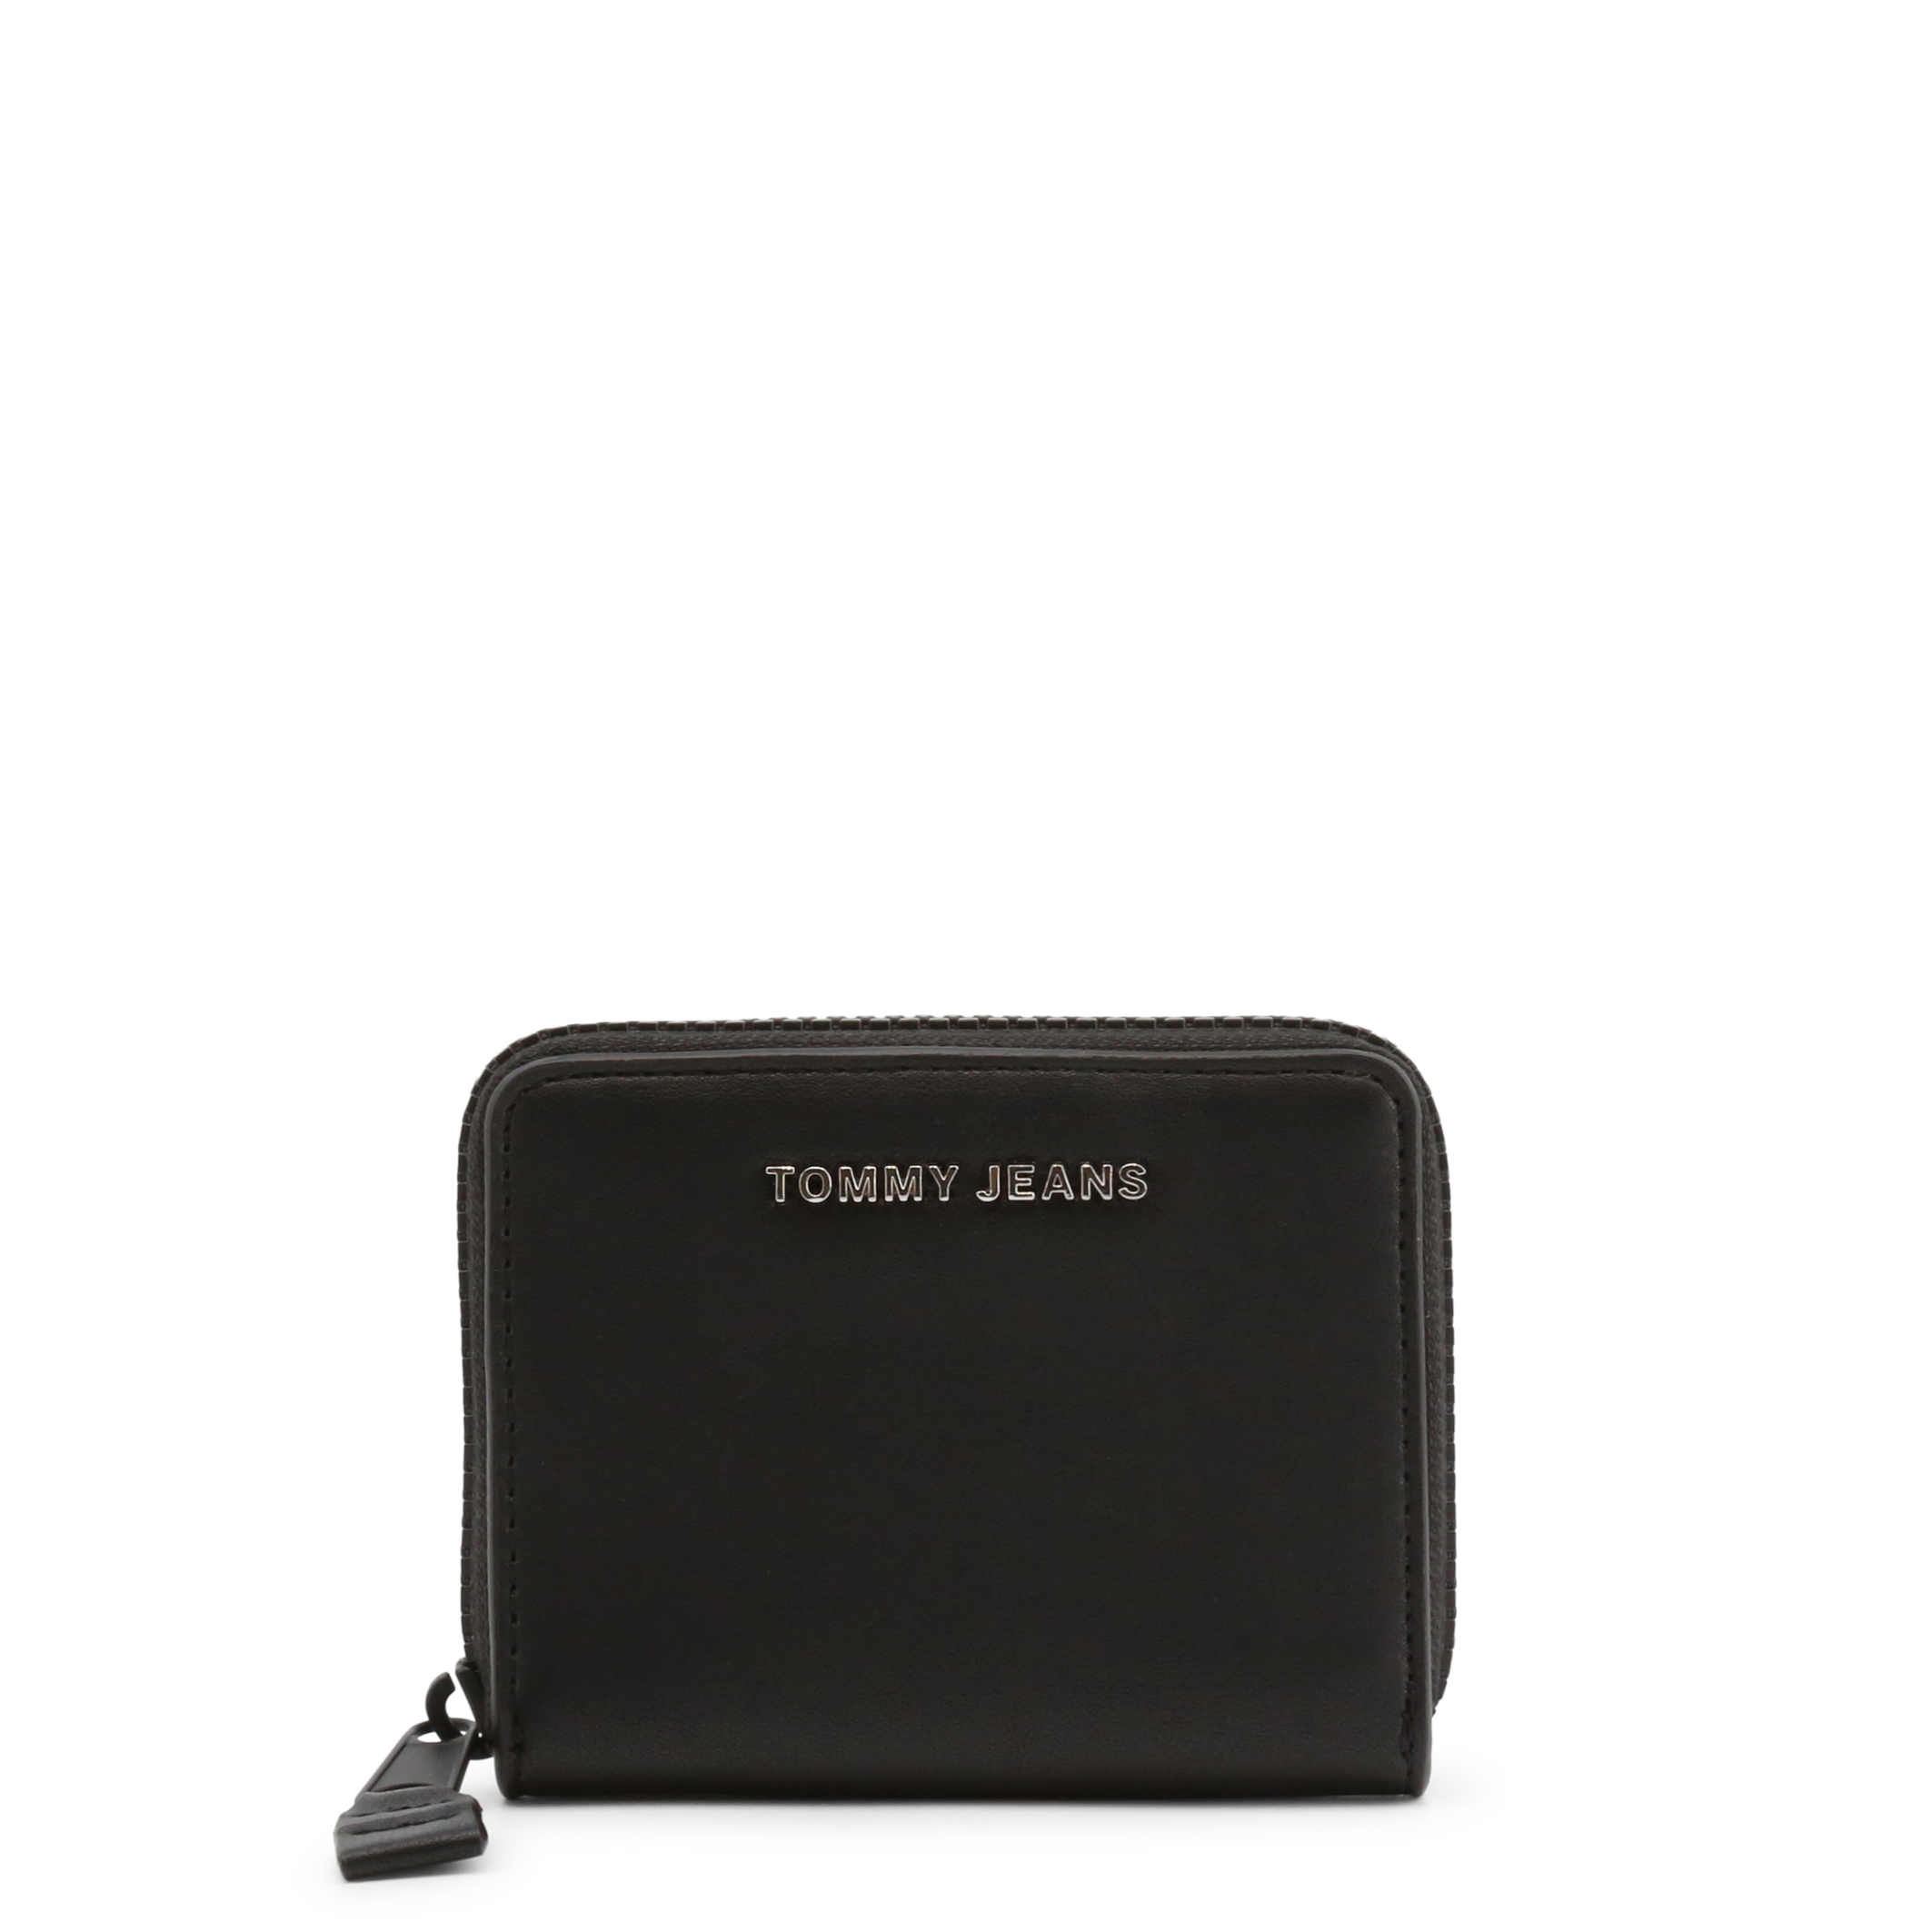 Tommy Hilfiger Black Wallets for Women - AW0AW11848